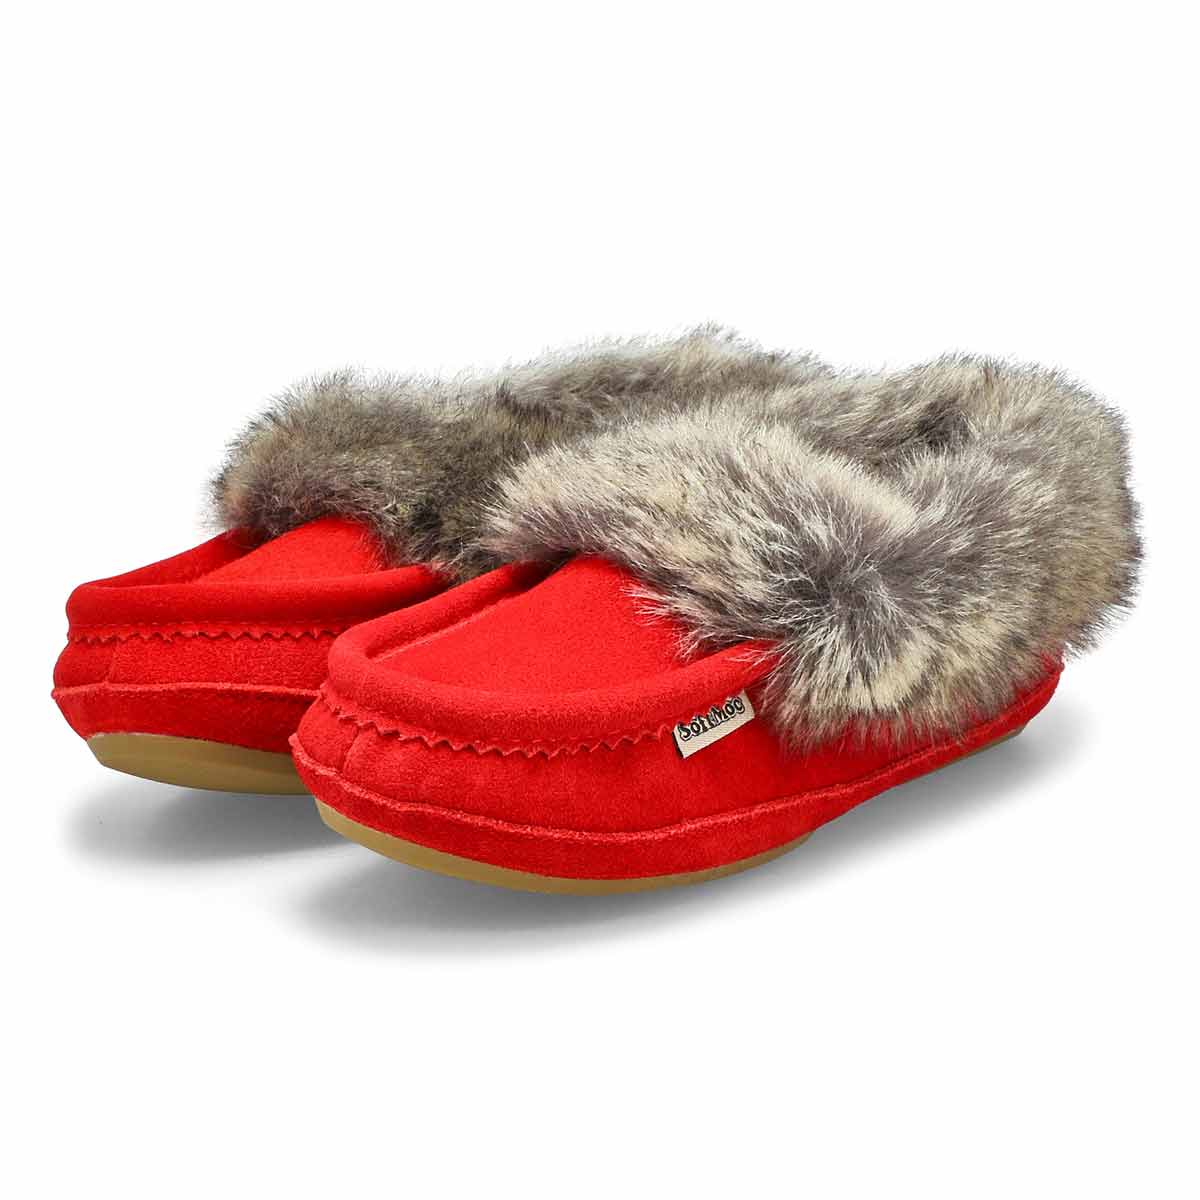 Women's Carrot 5 Faux Fur Moccasin - Red